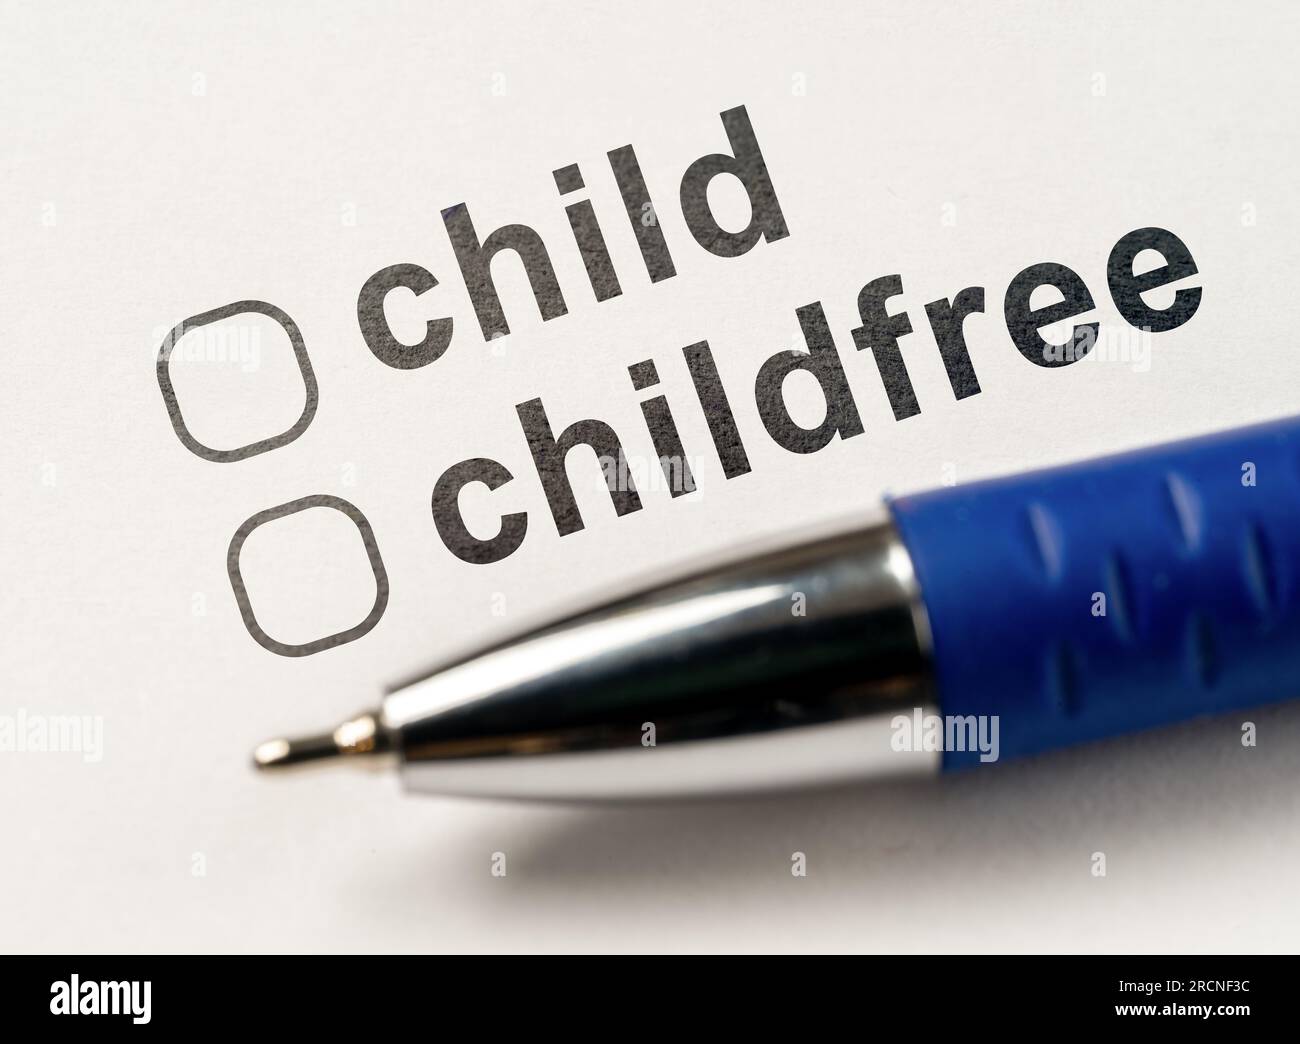 Child or Childfree checkbox on white paper with blue pen. Two checklists to choose between child and without children. decide whether to stay childfre Stock Photo